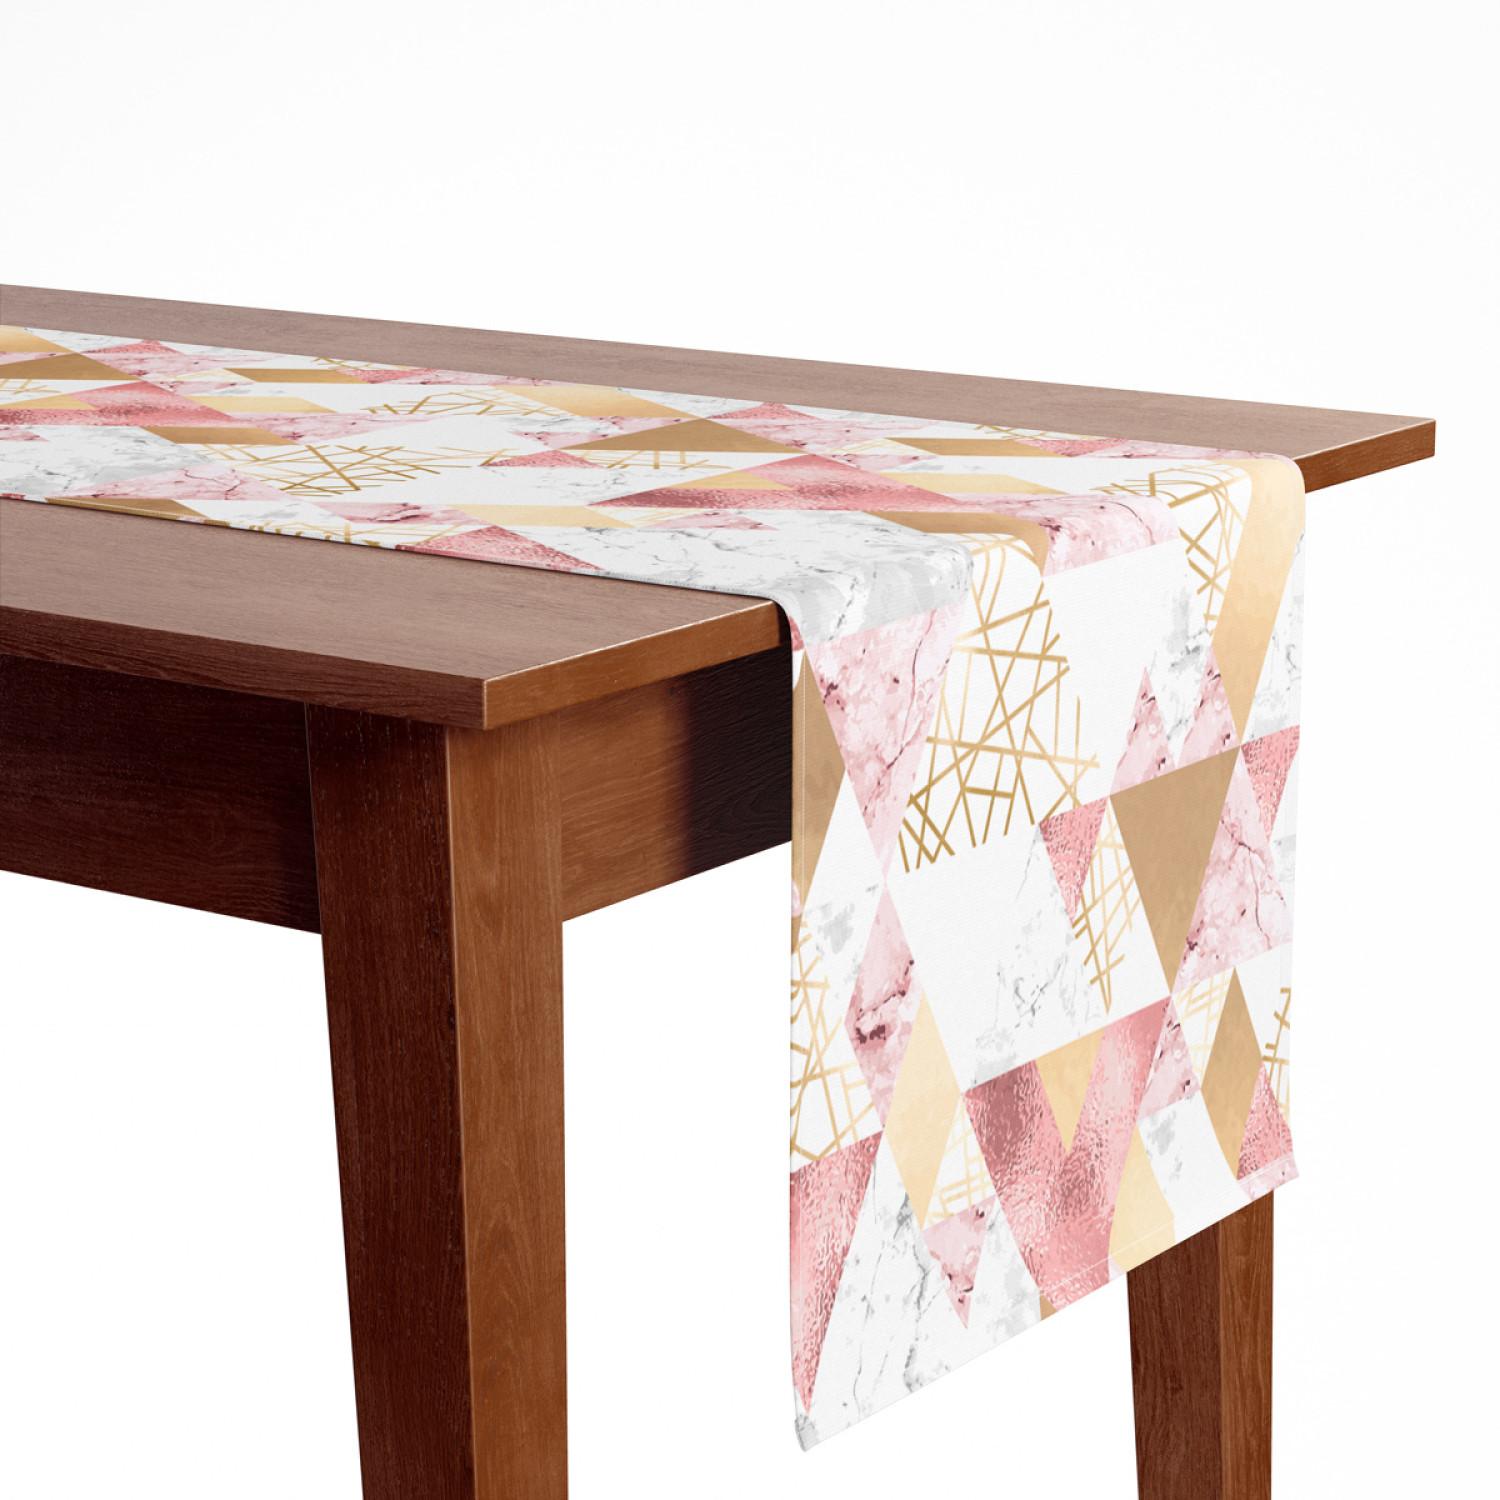 Camino de mesa Geometric patchwork - design with triangles, marble and gold pattern